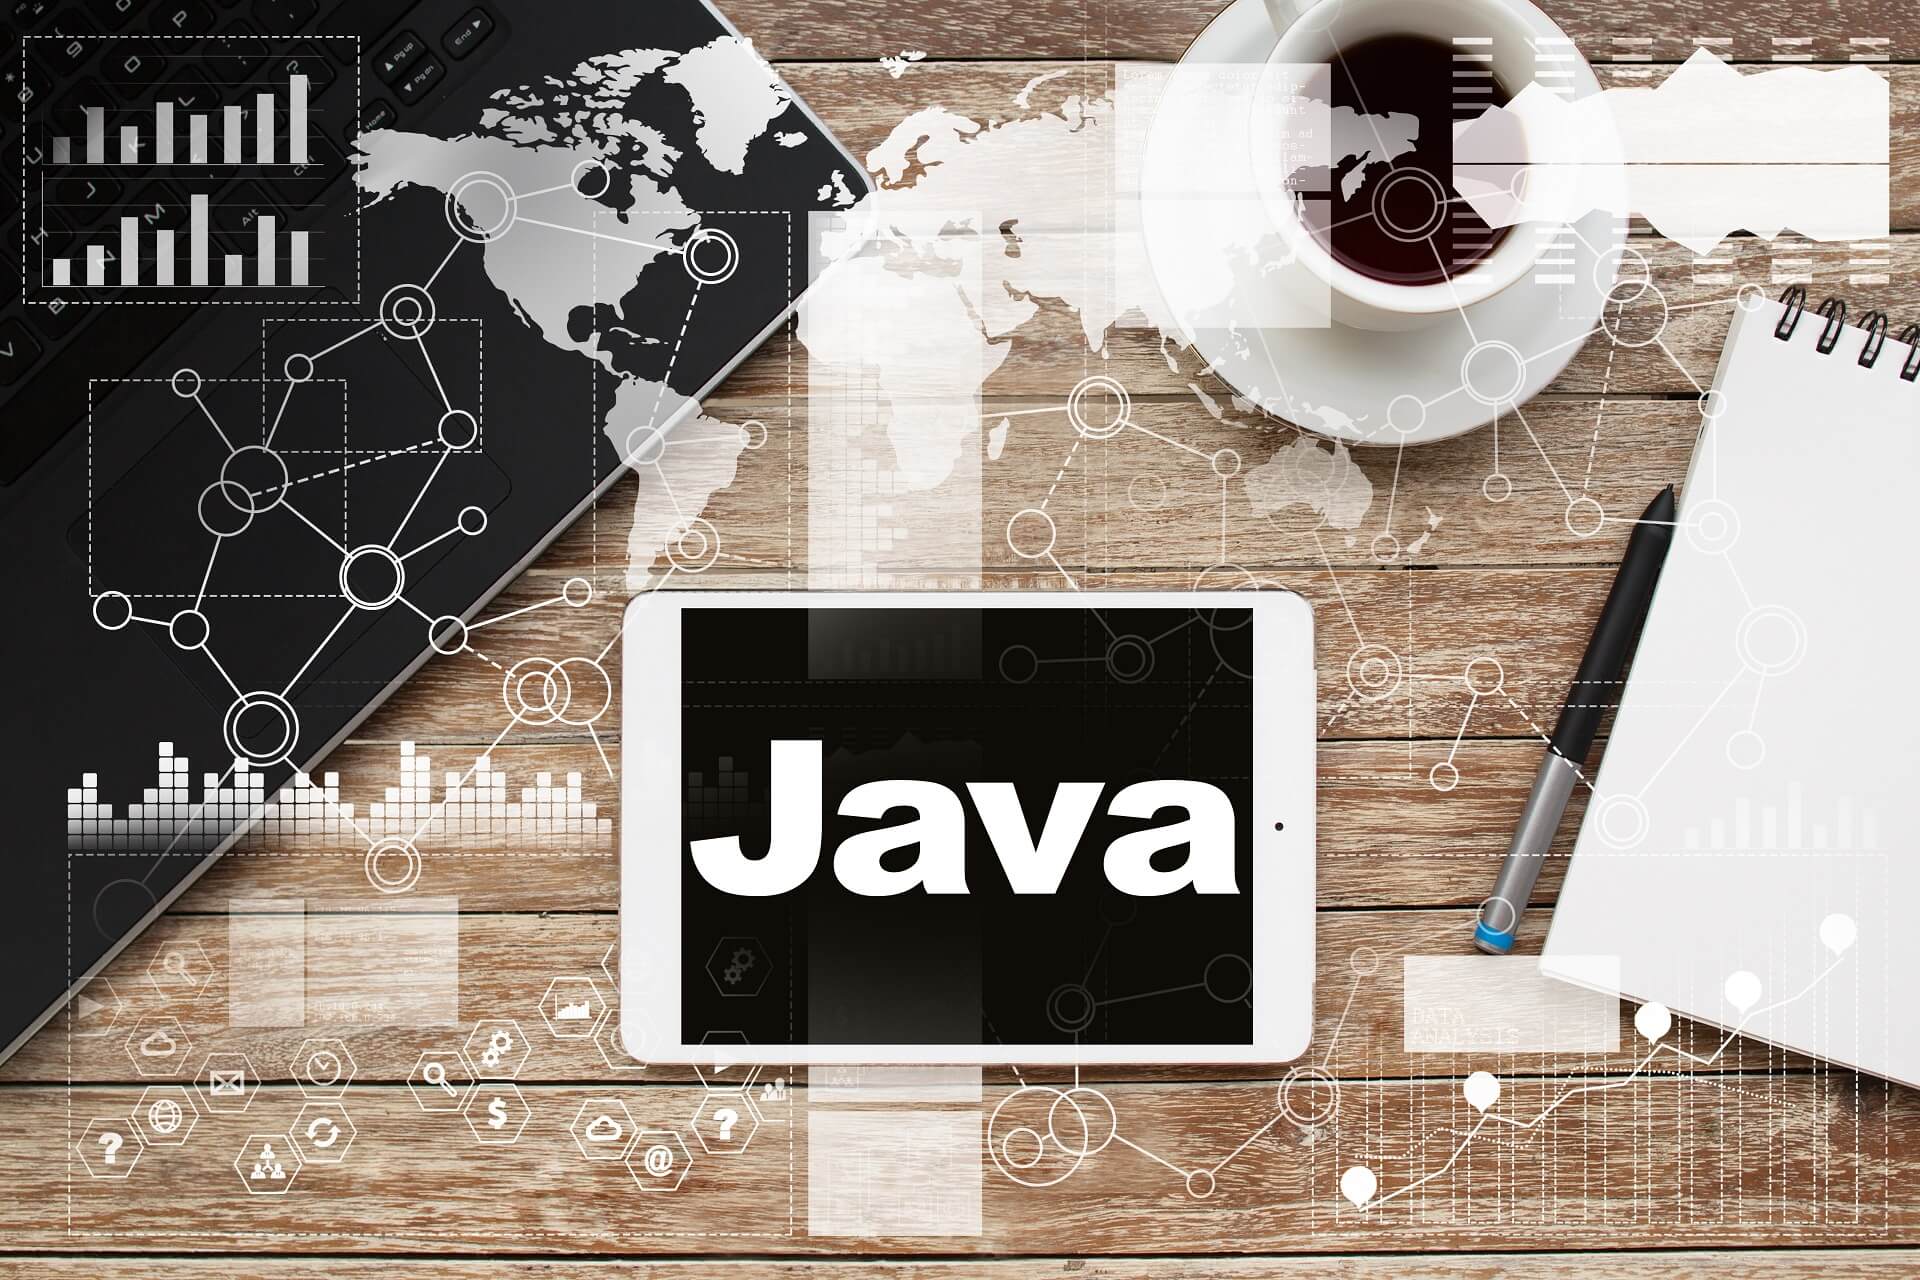 the required 64-bit java 1.7.0 could not be found